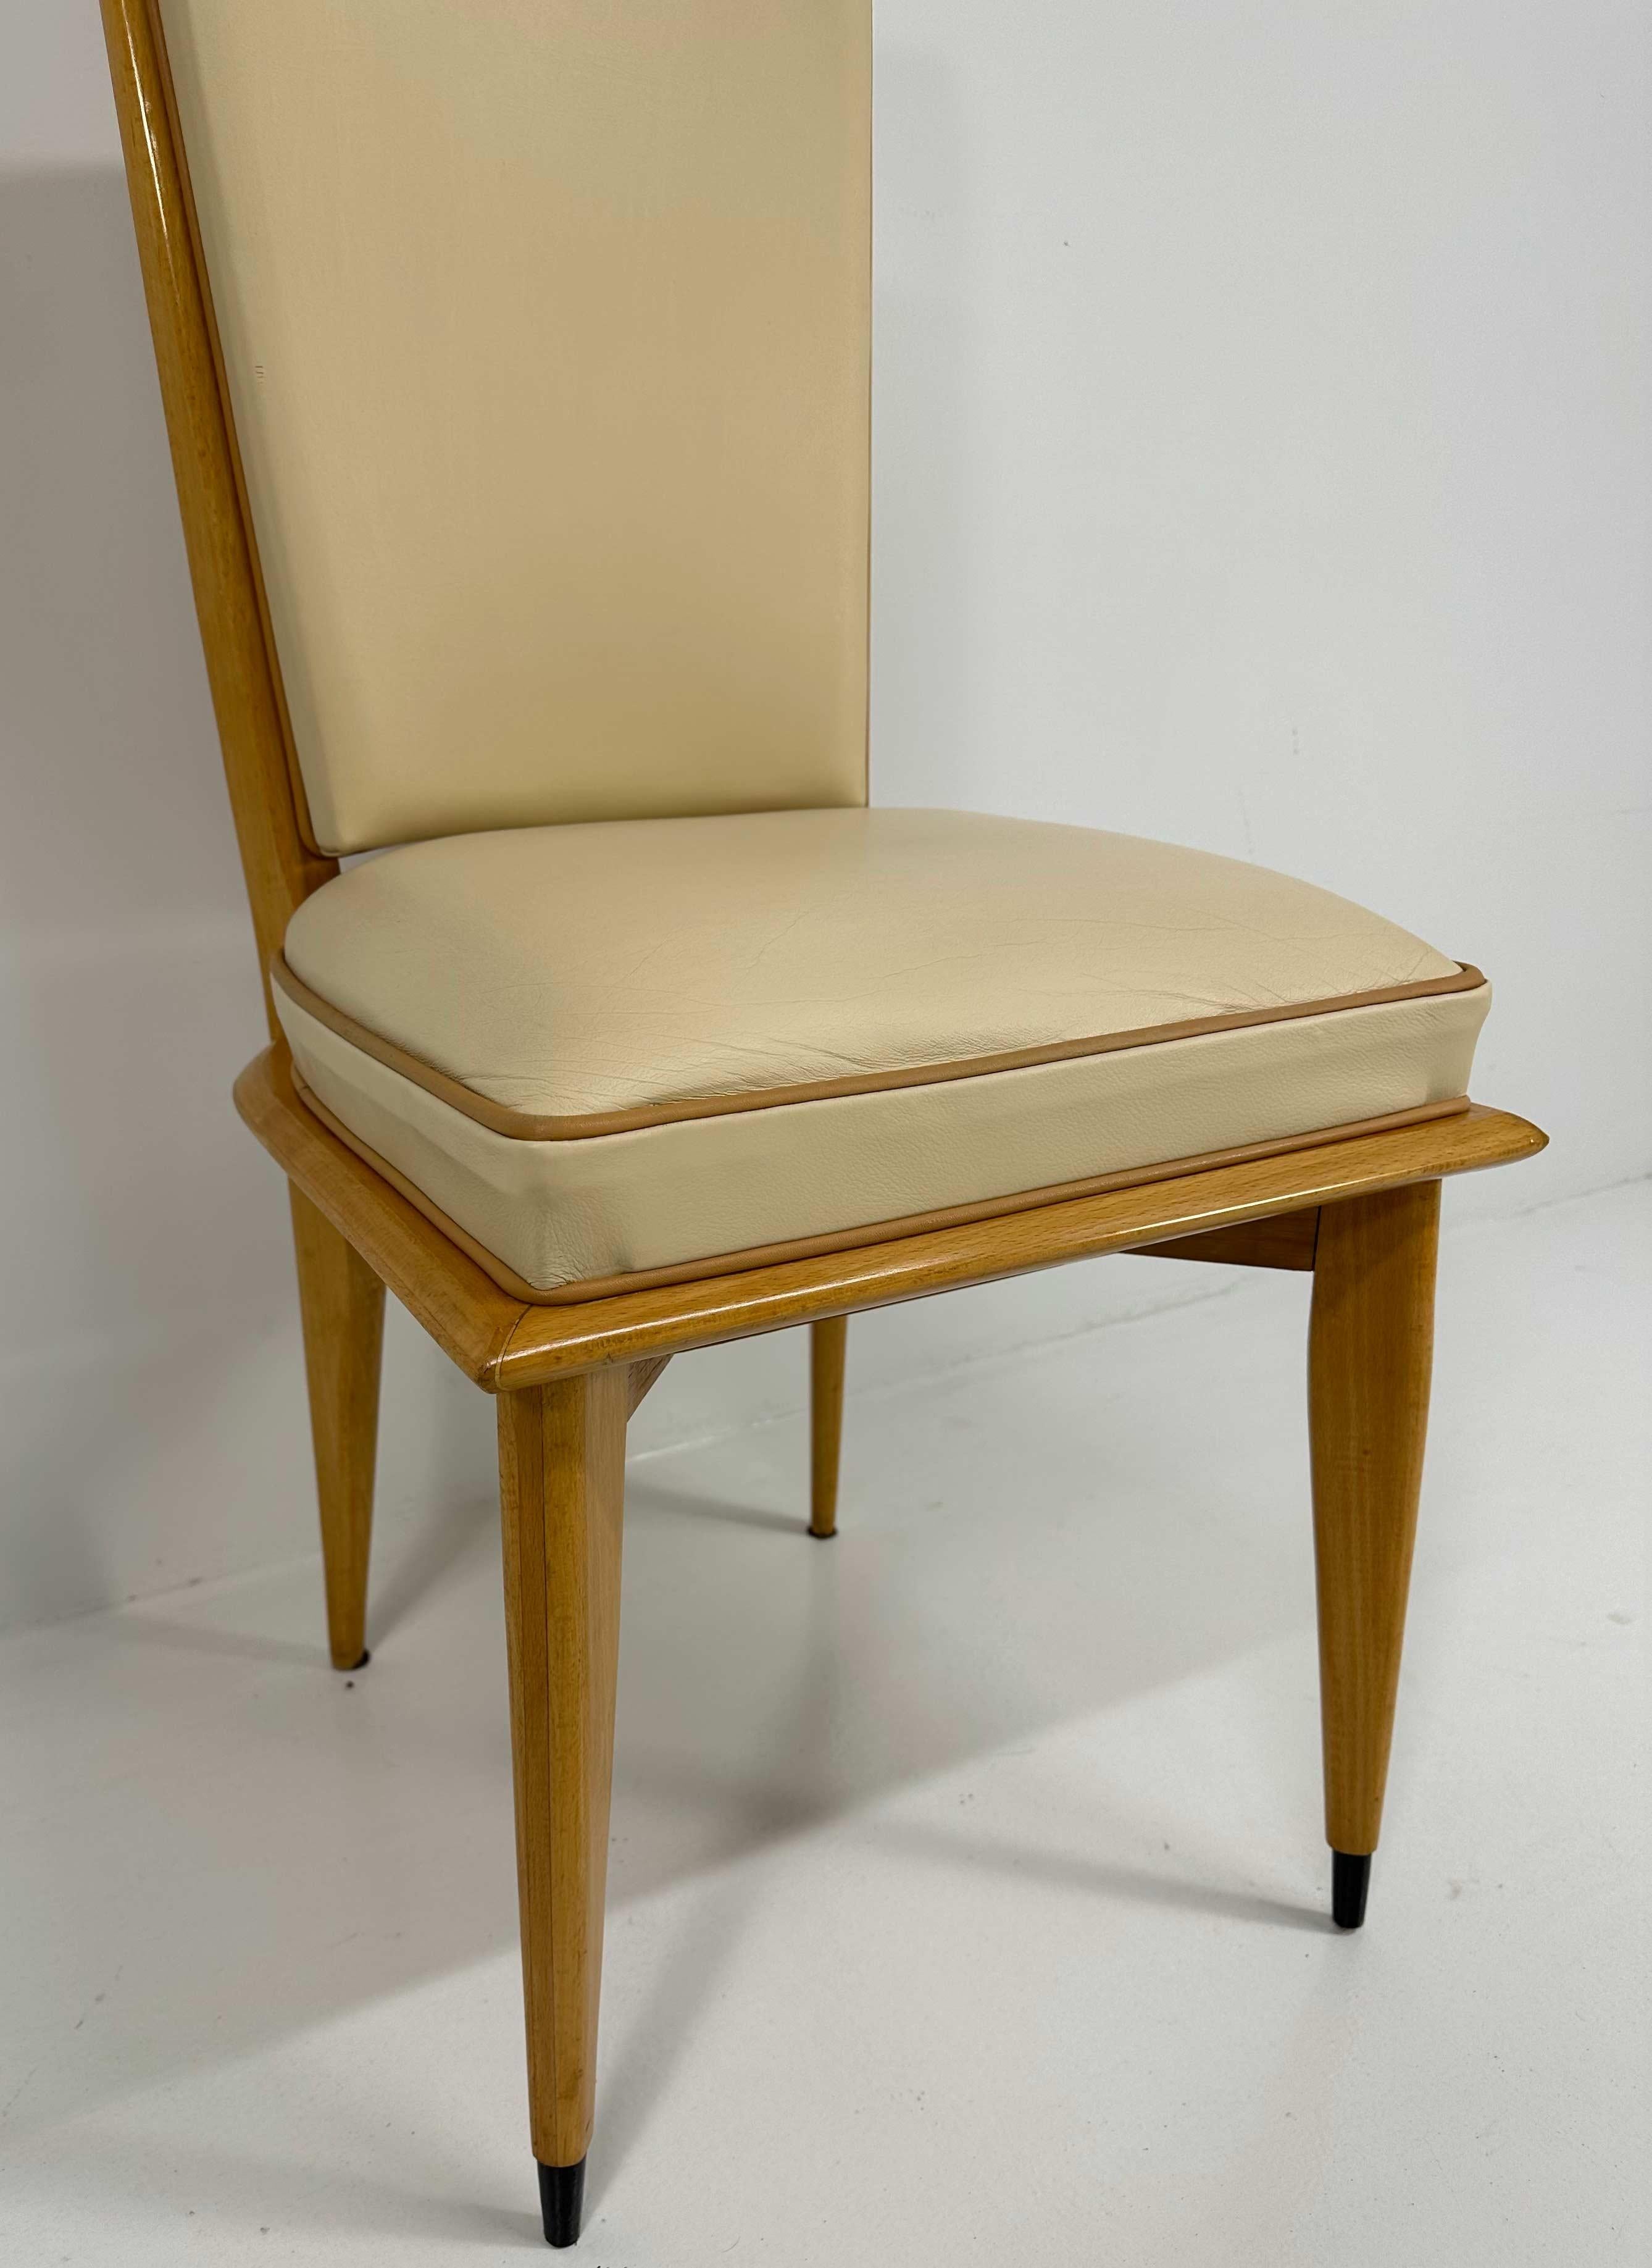 French Art Deco Set of 12 Chairs in Maple and Cream Leather, 1930s For Sale 3